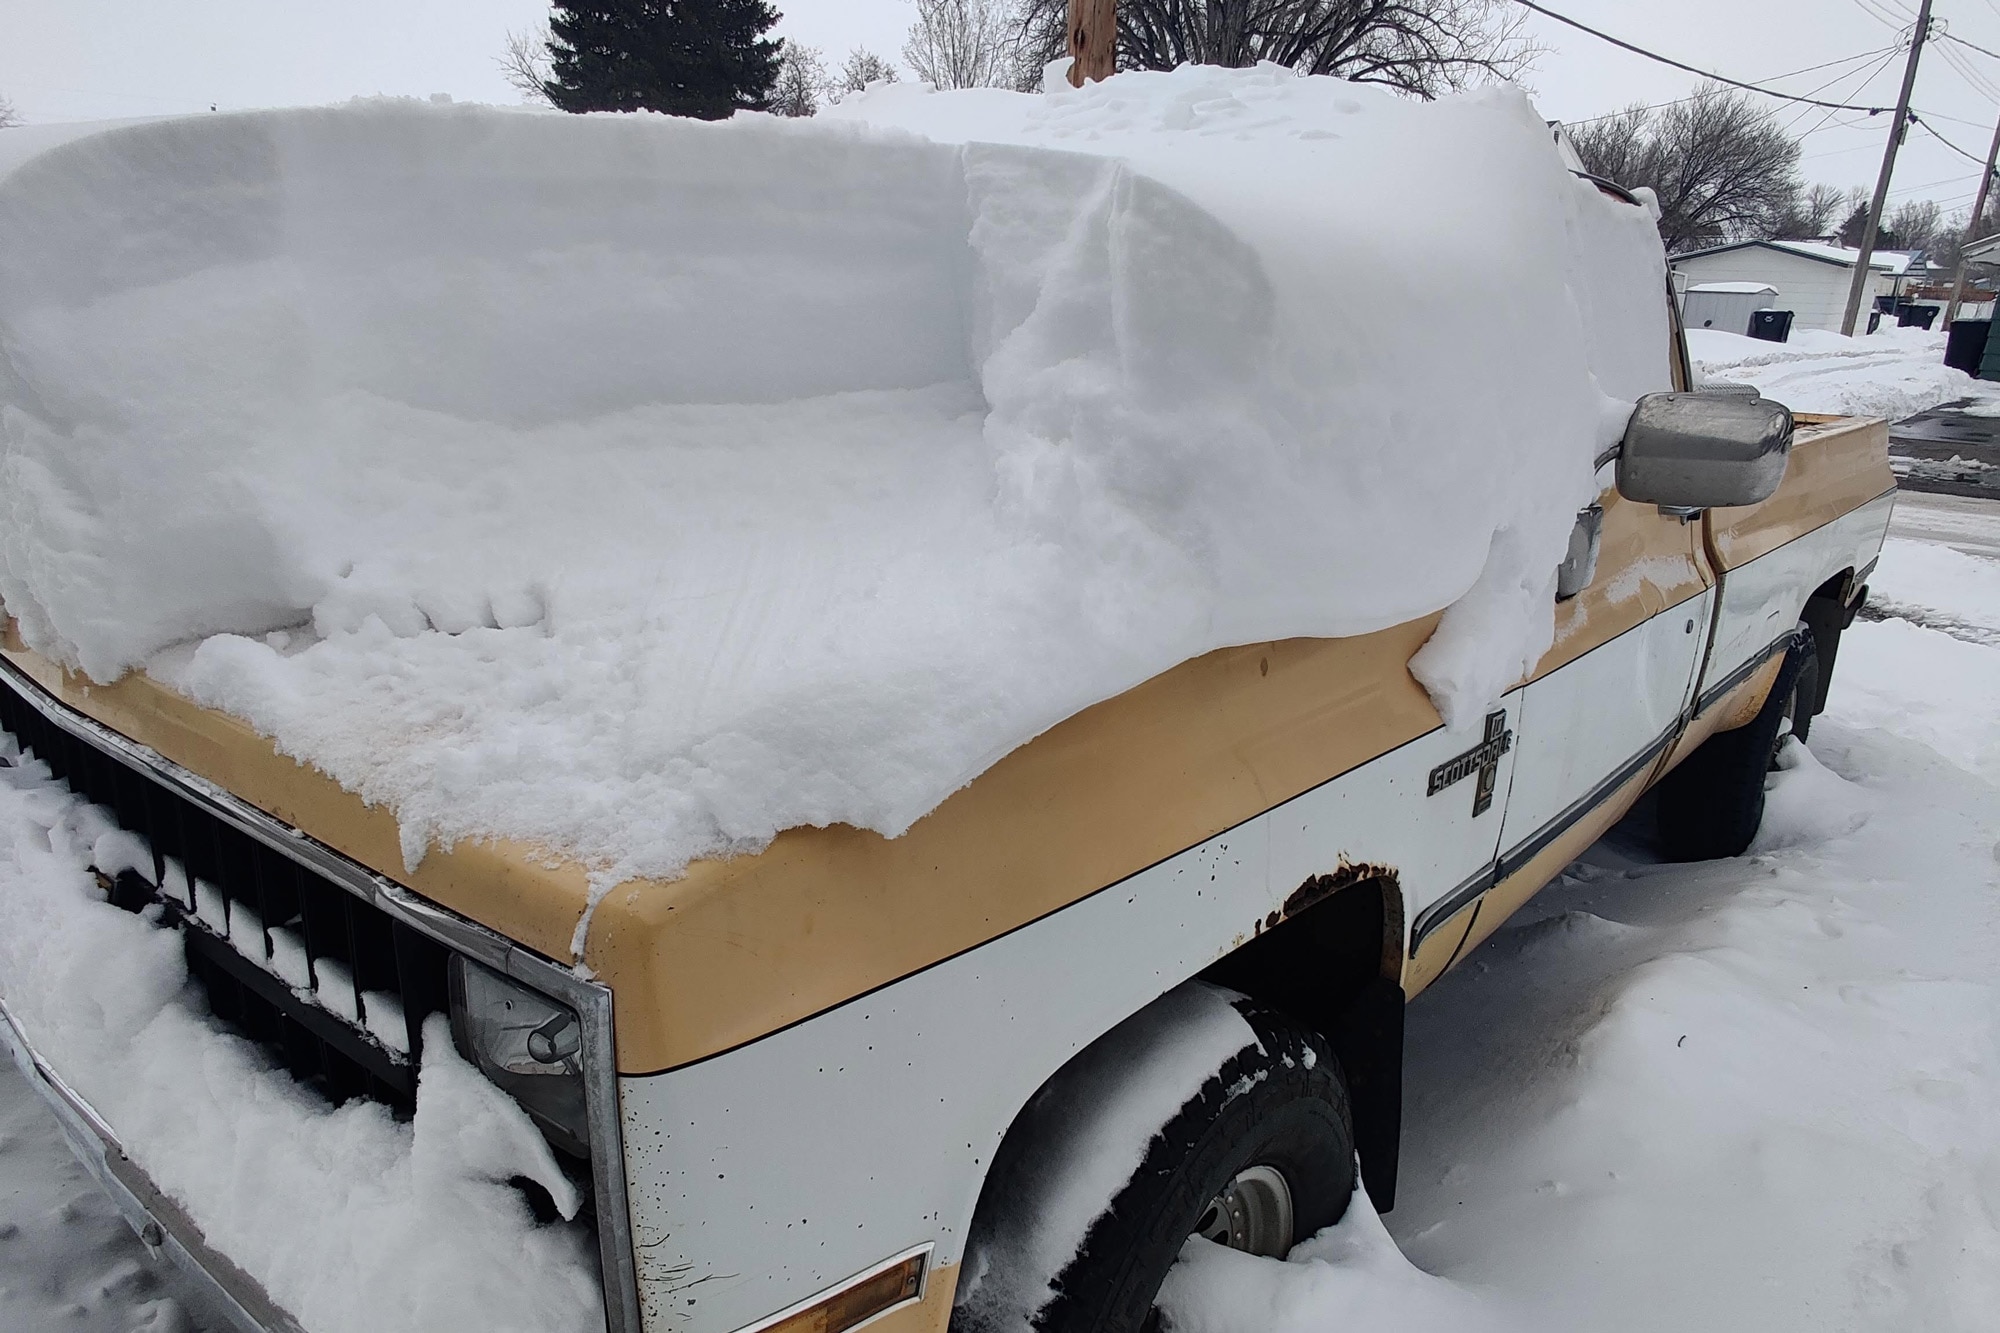 An older yellow and white Chevrolet pickup truck covered in snow